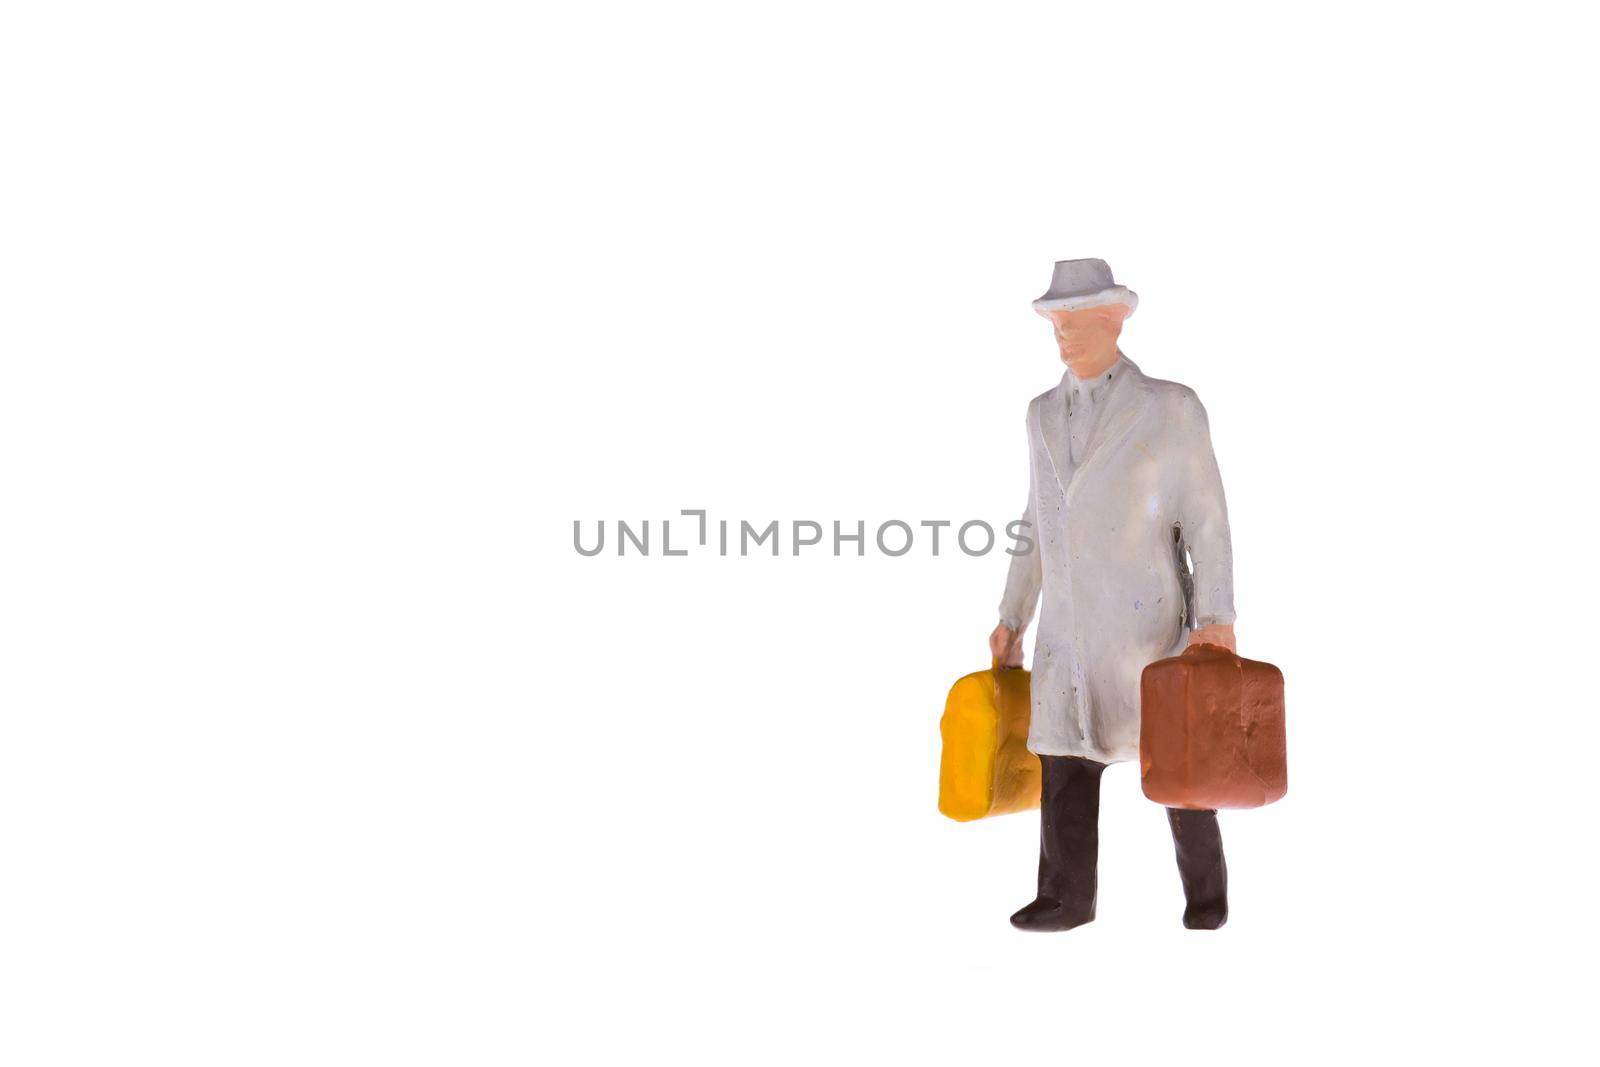 Close up of Miniature businessman and tourist people isolate on white background. Elegant Design with copy space for placement your text, mock up for travel concept